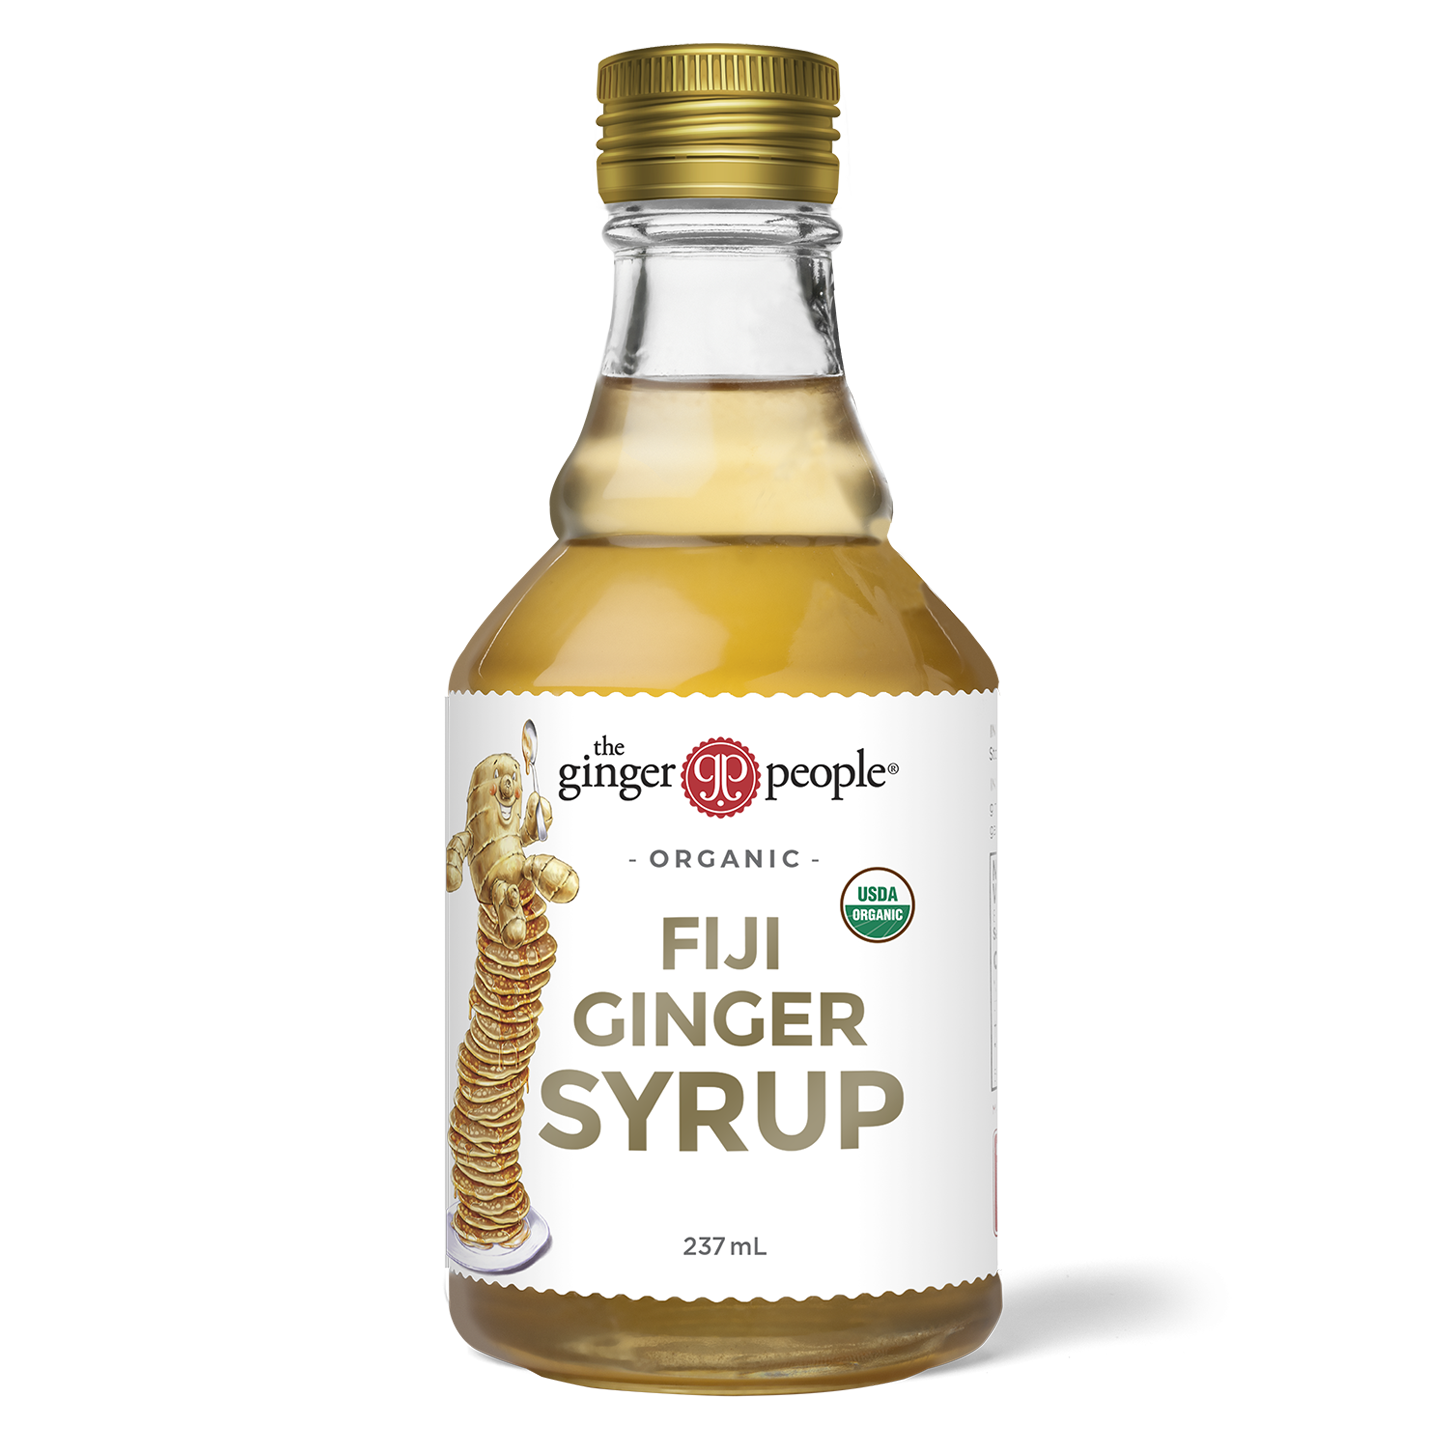 The Ginger People Fiji Ginger Syrup Organic 237ml